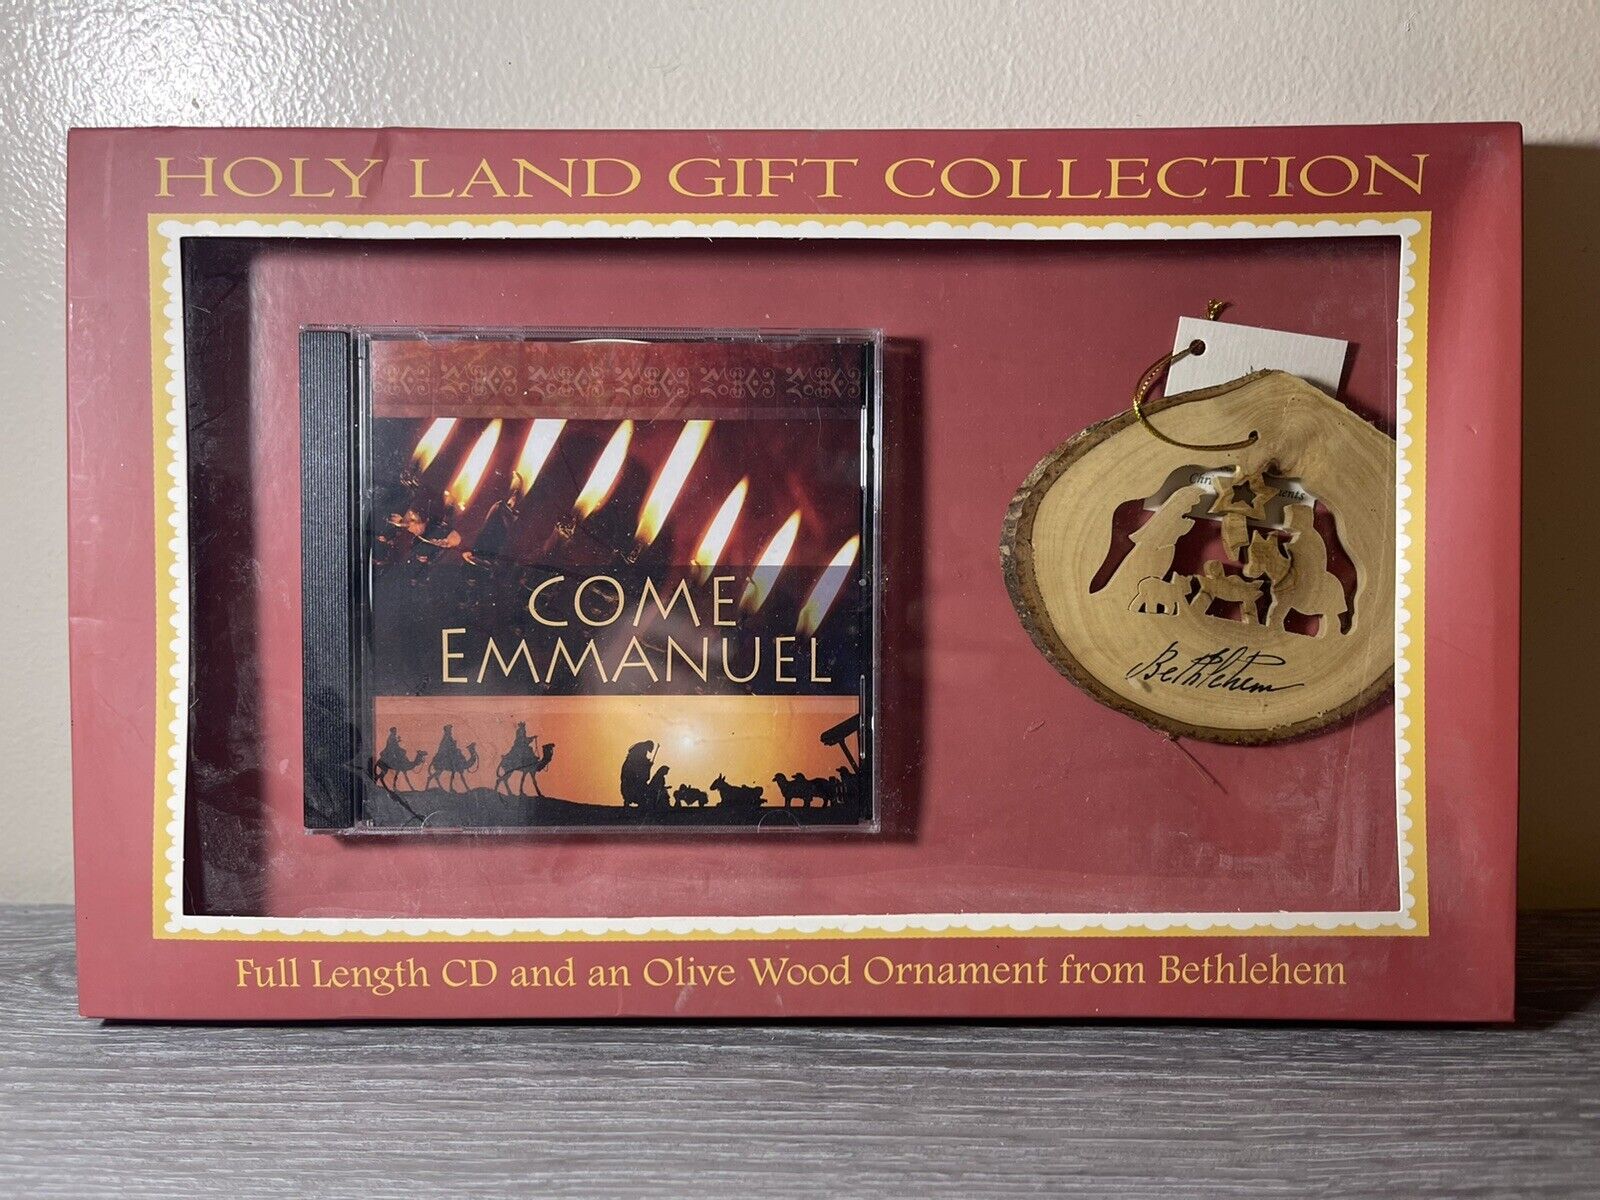 Holy Land Gift Collection - CD & Hand-Carved Ornament Come Emmanuel New In Box